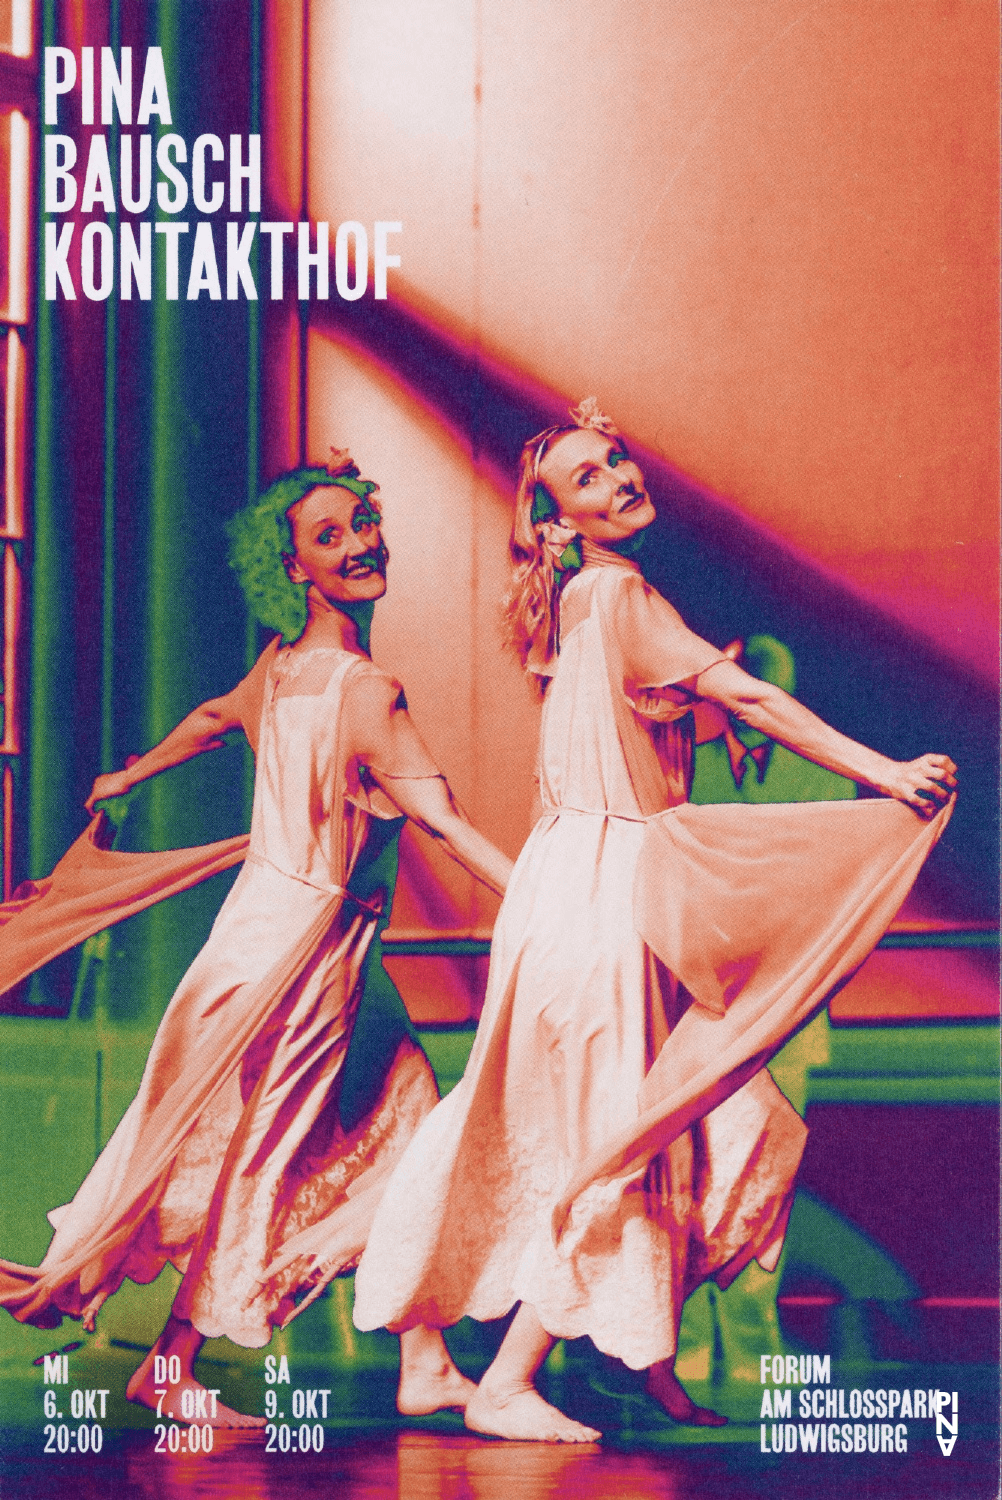 Booklet for “Kontakthof” by Pina Bausch with Tanztheater Wuppertal in in Ludwigsburg, 10/06/2021 – 10/09/2021